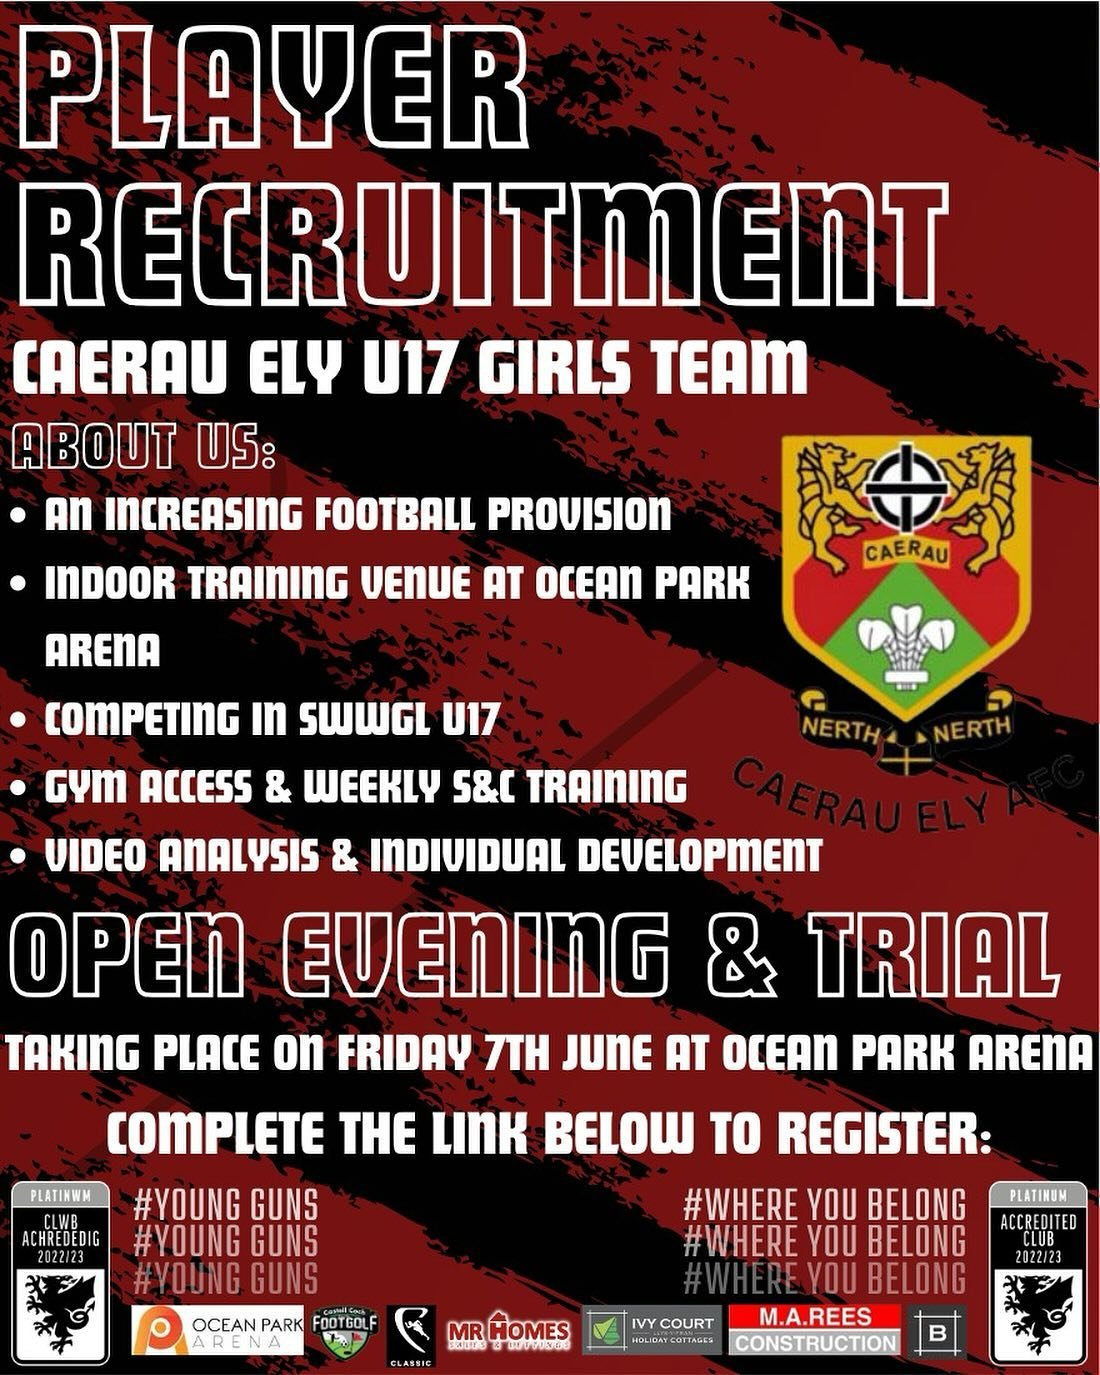 We are delighted as a club to be starting our female pathway for the 24/25 season. Working in partnership with Cardiff Wanderers FC we will provide fantastic playing opportunities via our pathway from U17s onwards. 
If you&rsquo;re a player moving in